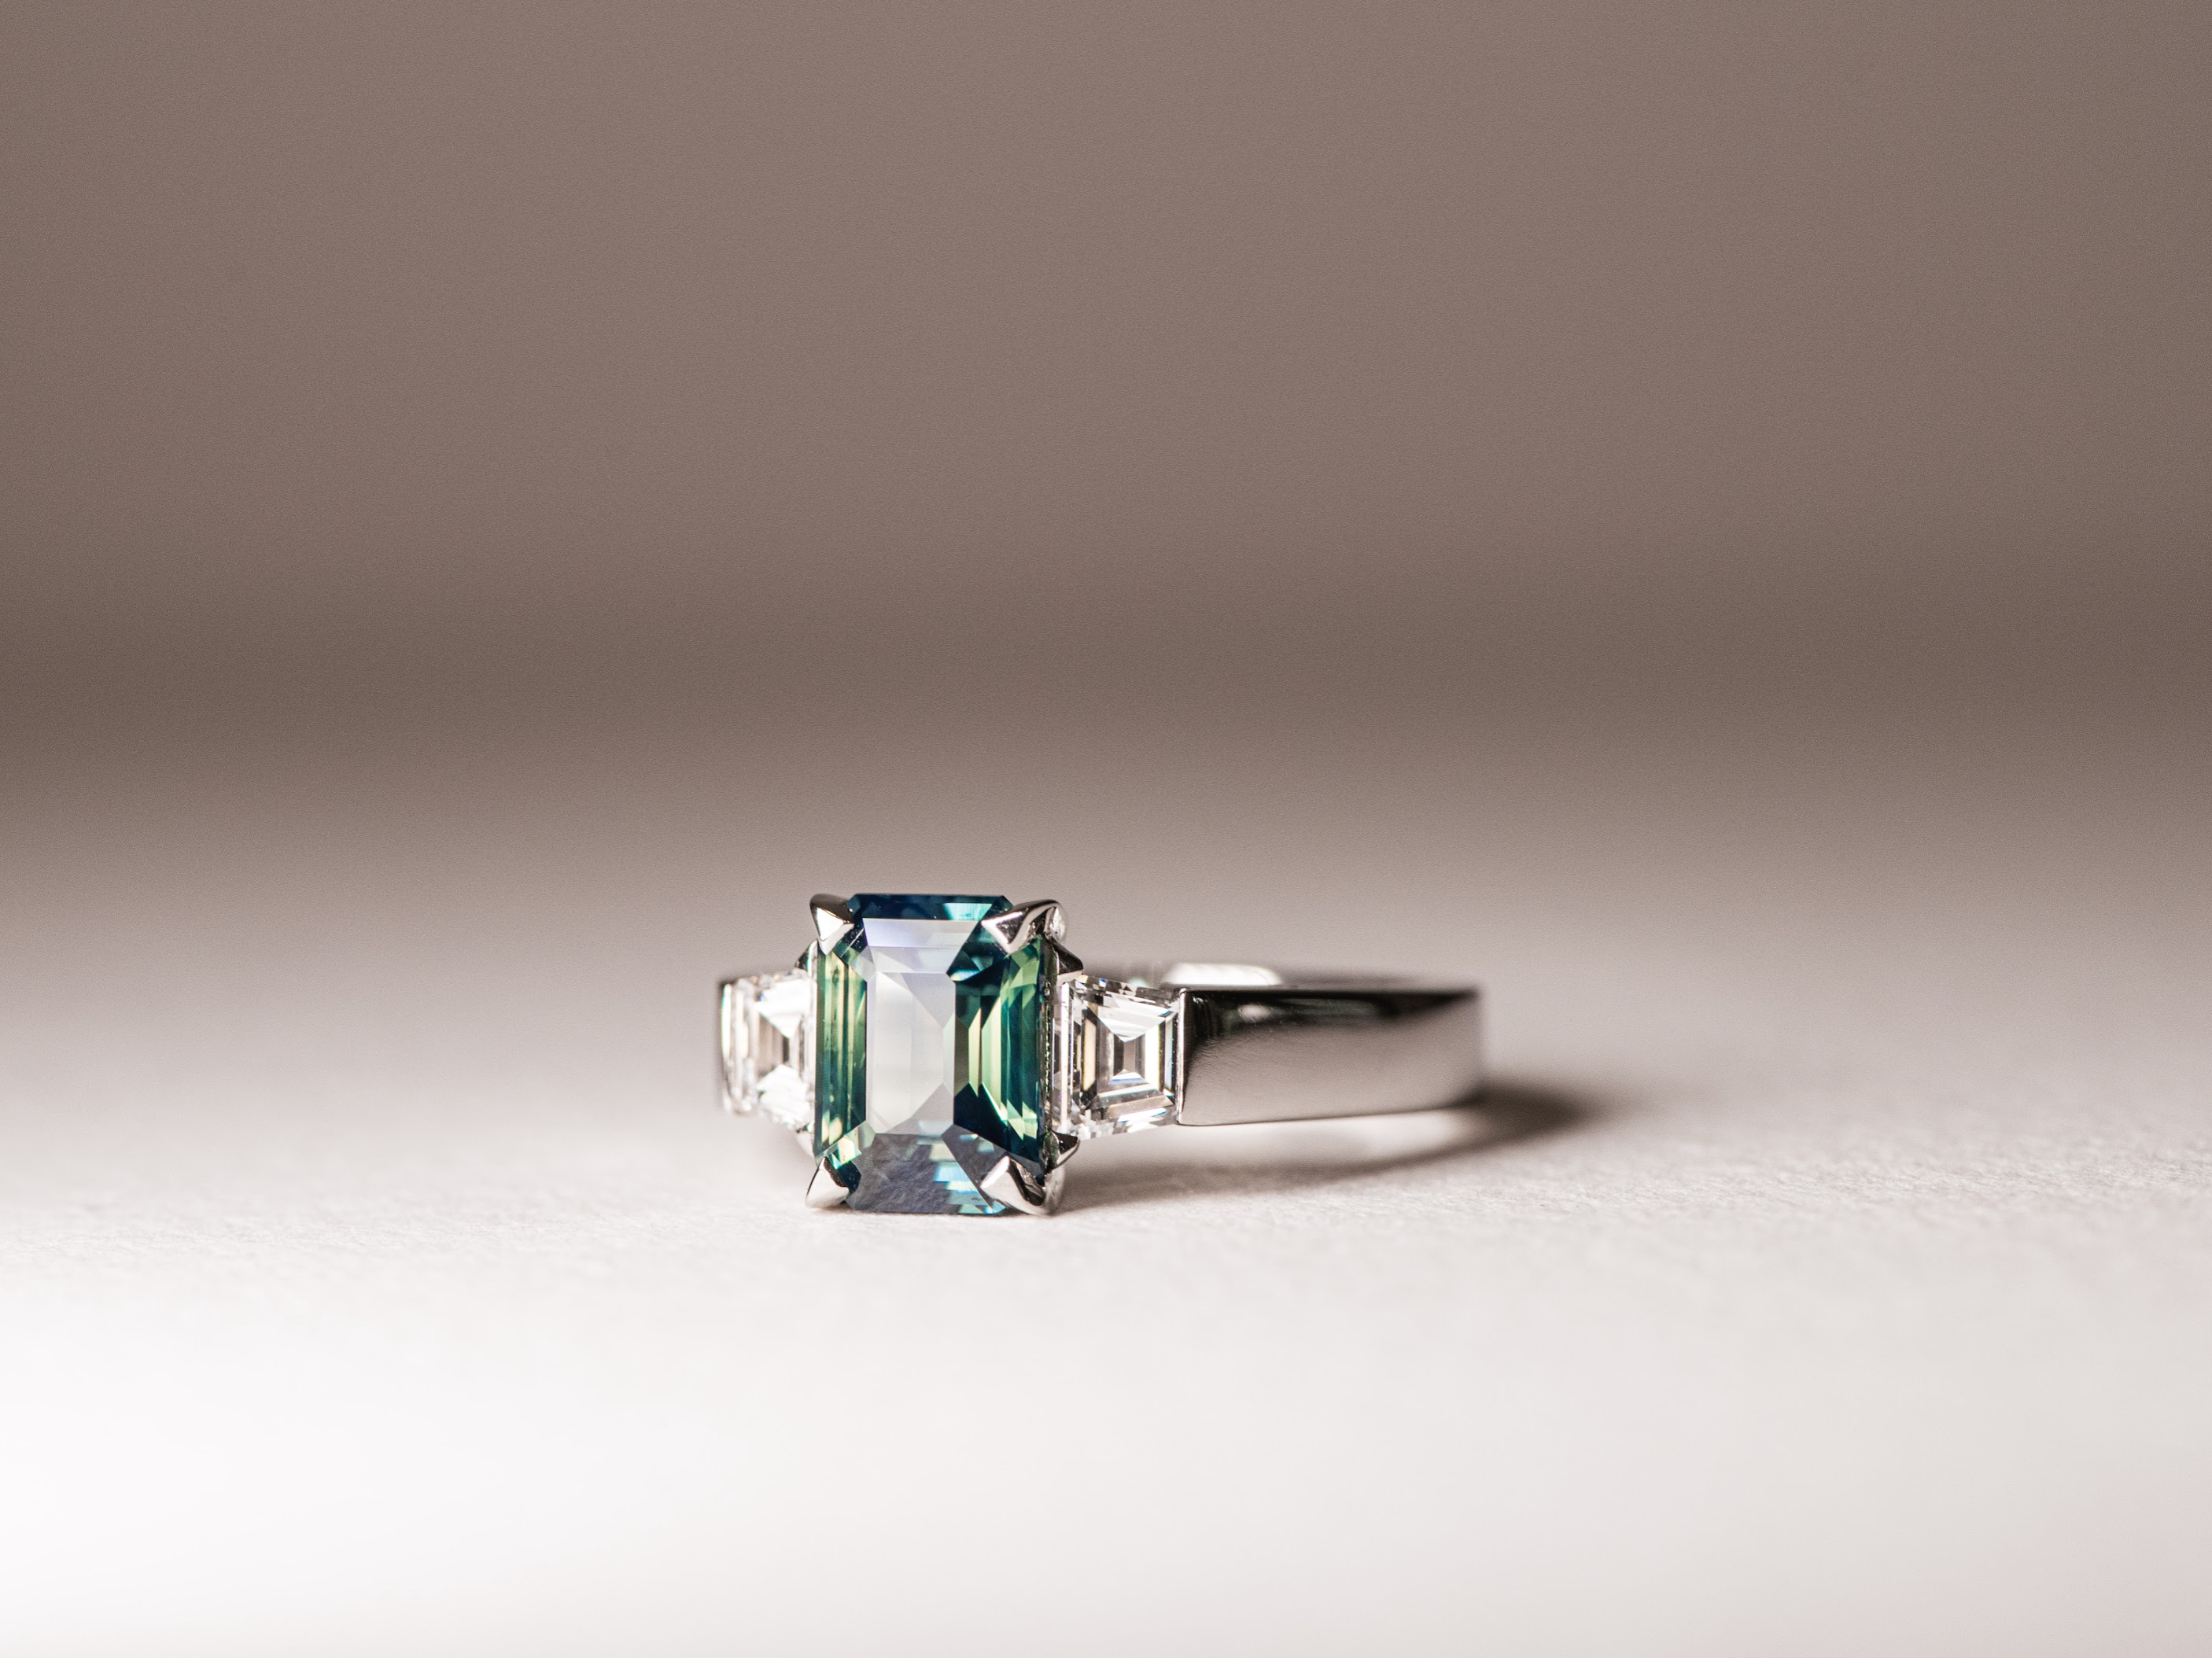 Teal Sapphire and Diamond Three stone engagement ring in Platinum - Dean & Dust - Bespoke Design